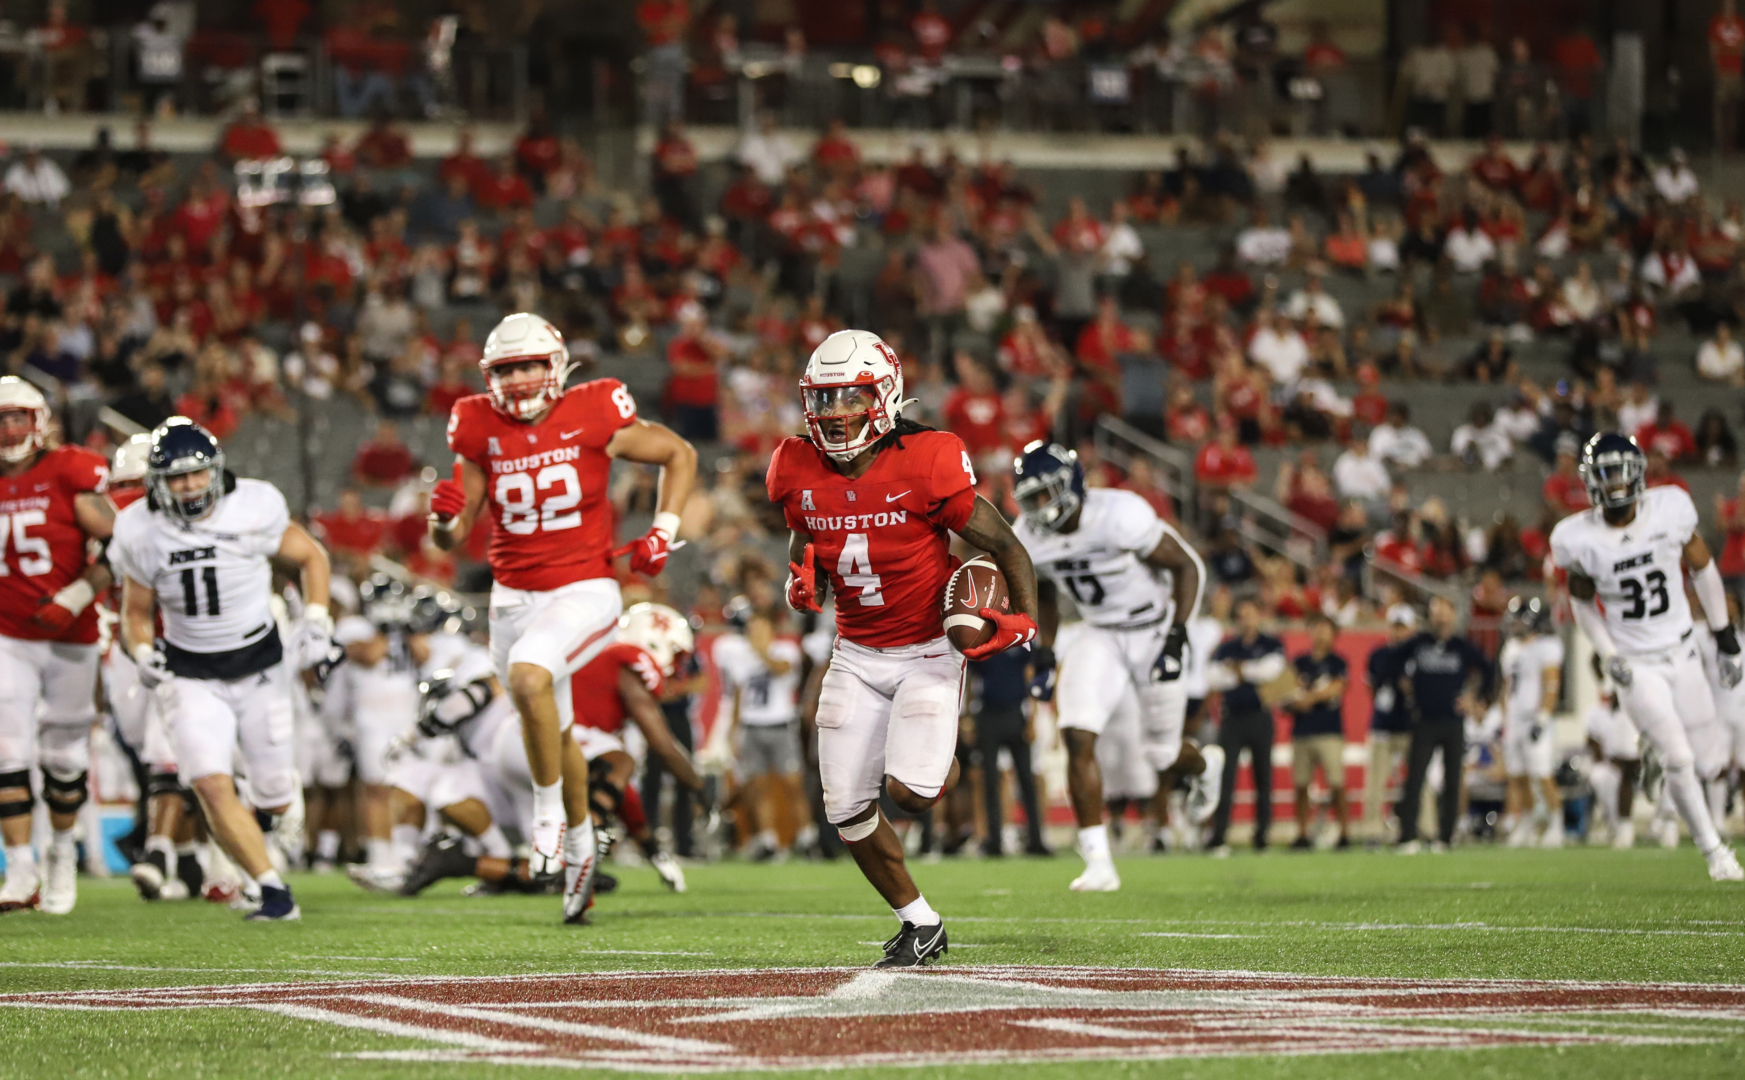 UH football’s Ta’Zhawn Henry rushed for 112 yards and a touchdown in the Cougars’ win over Rice last weekend. | Sean Thomas/The Cougar